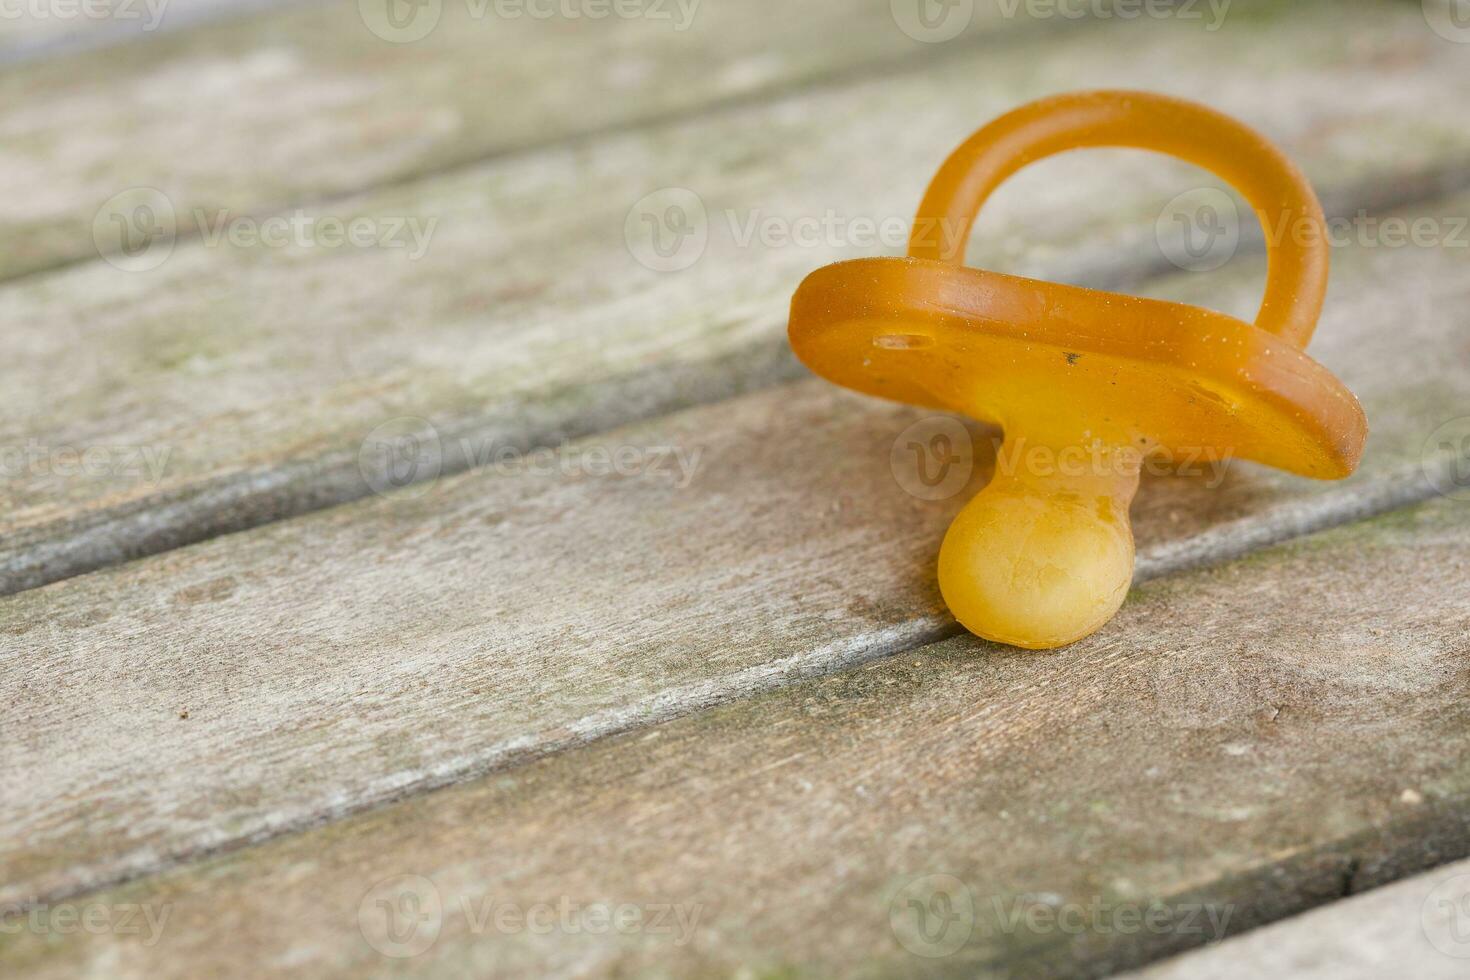 A dirty rubber pacifier on a wooden surface. Closeup photo